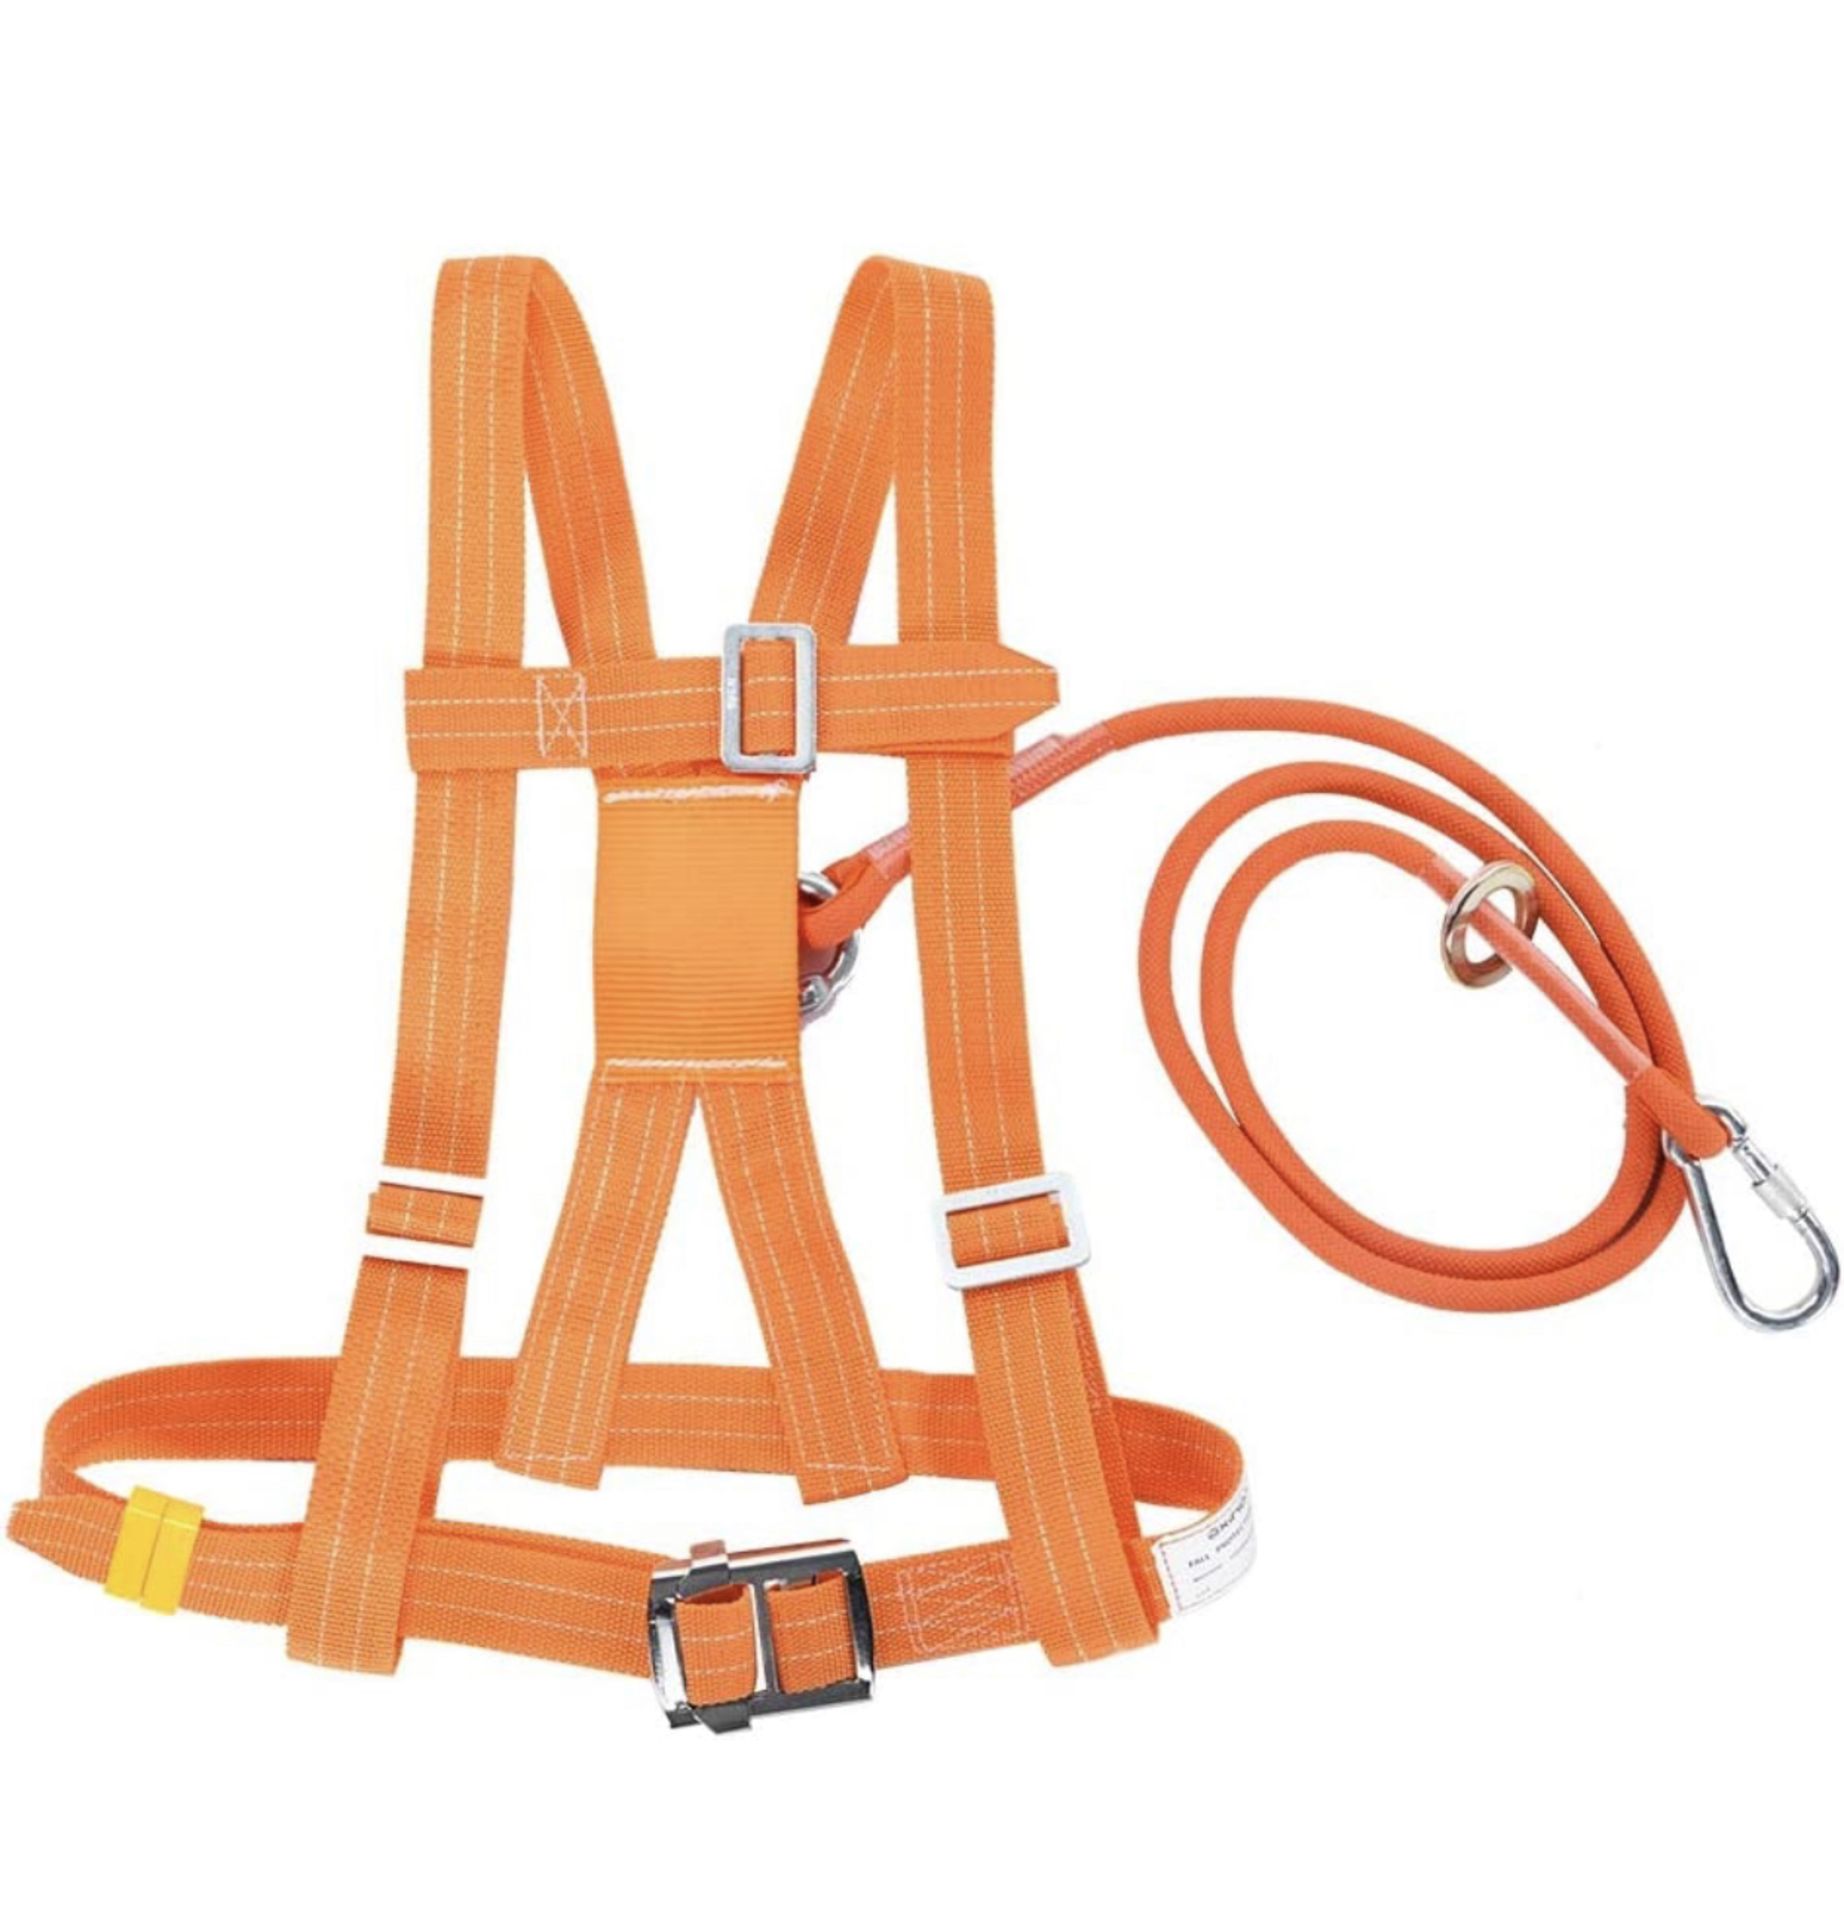 Dioche Safety Harness Kit Fall Protection Safety Harness RRP £54.99